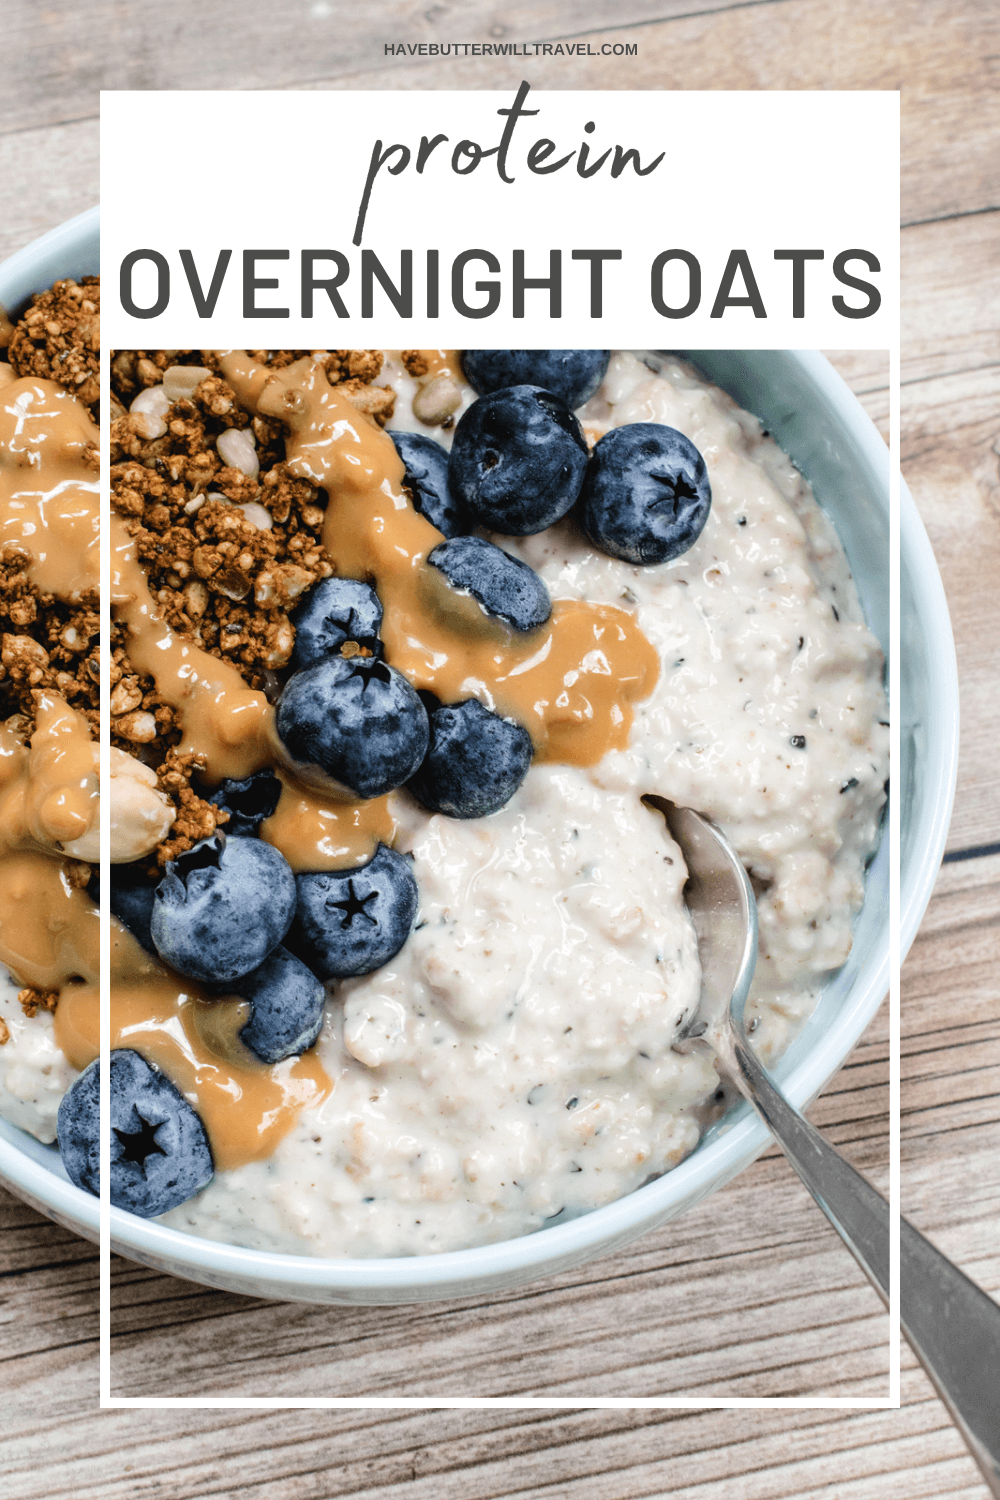 If you are looking for a quick, make ahead breakfast then this protein overnight oat recipe is exactly what you need! It is perfect for meal prepping, as you can make your breakfast ahead of time and still ensure you are eating plenty of protein. 